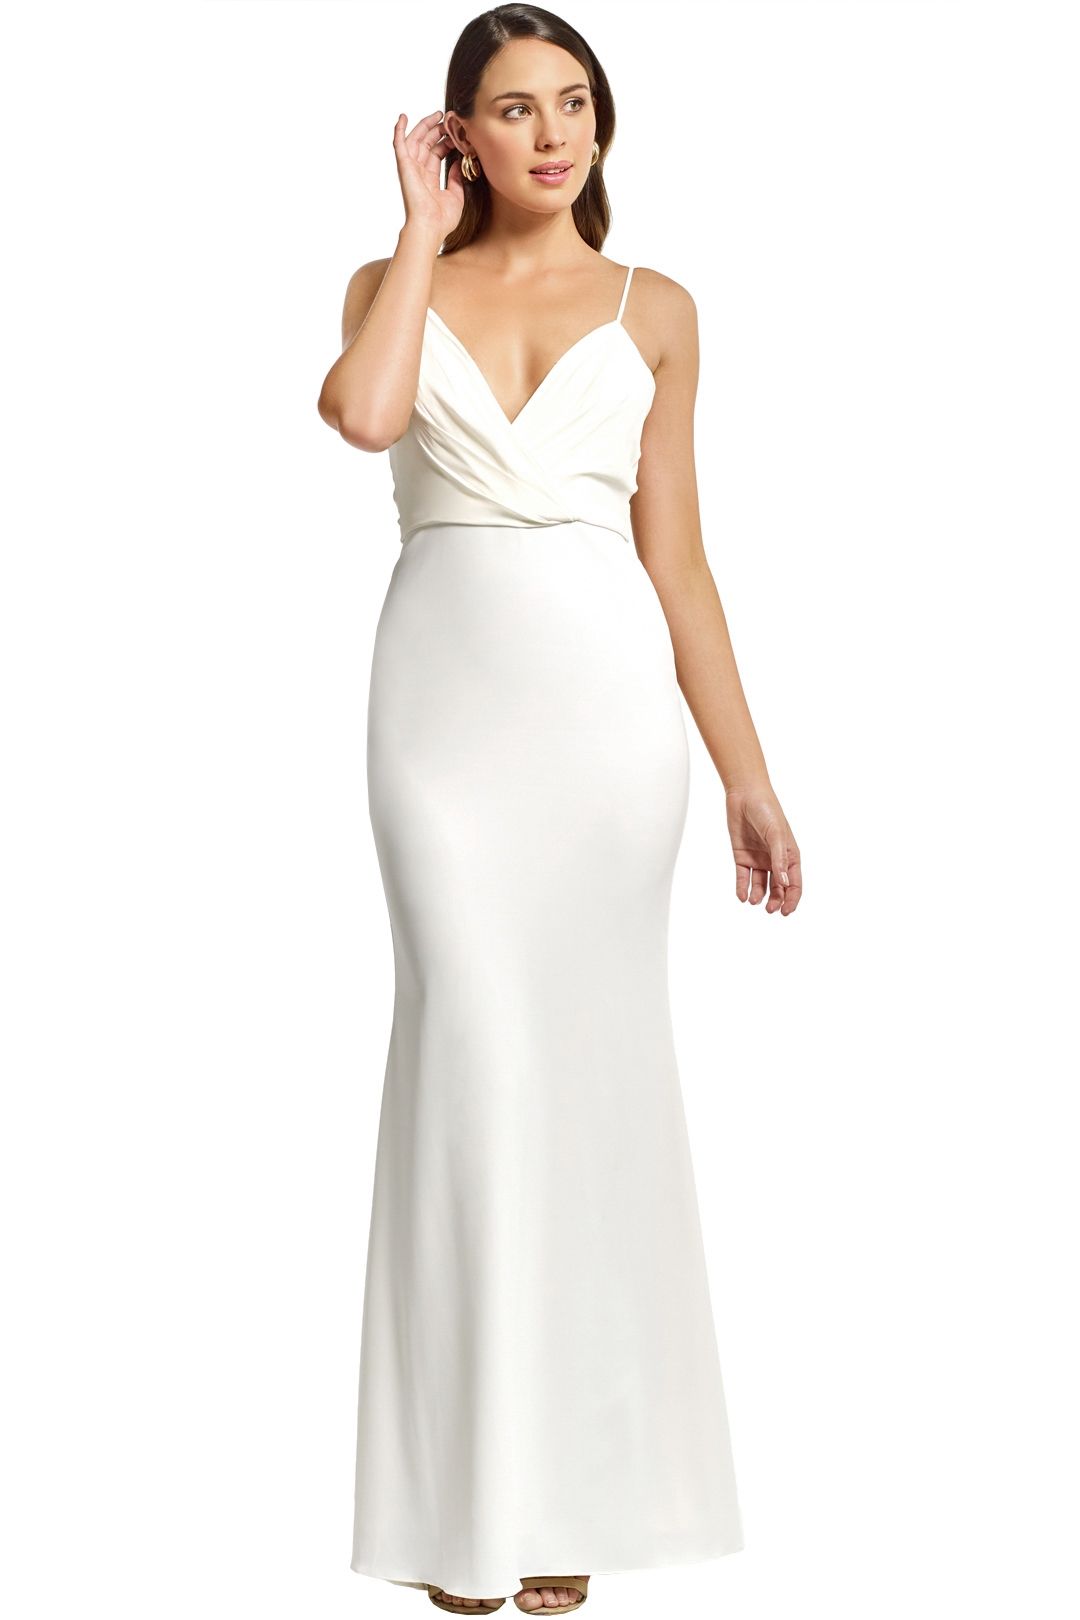 Badgley Mischka - Draped Top Crepe Skirt Gown - Ivory - Front